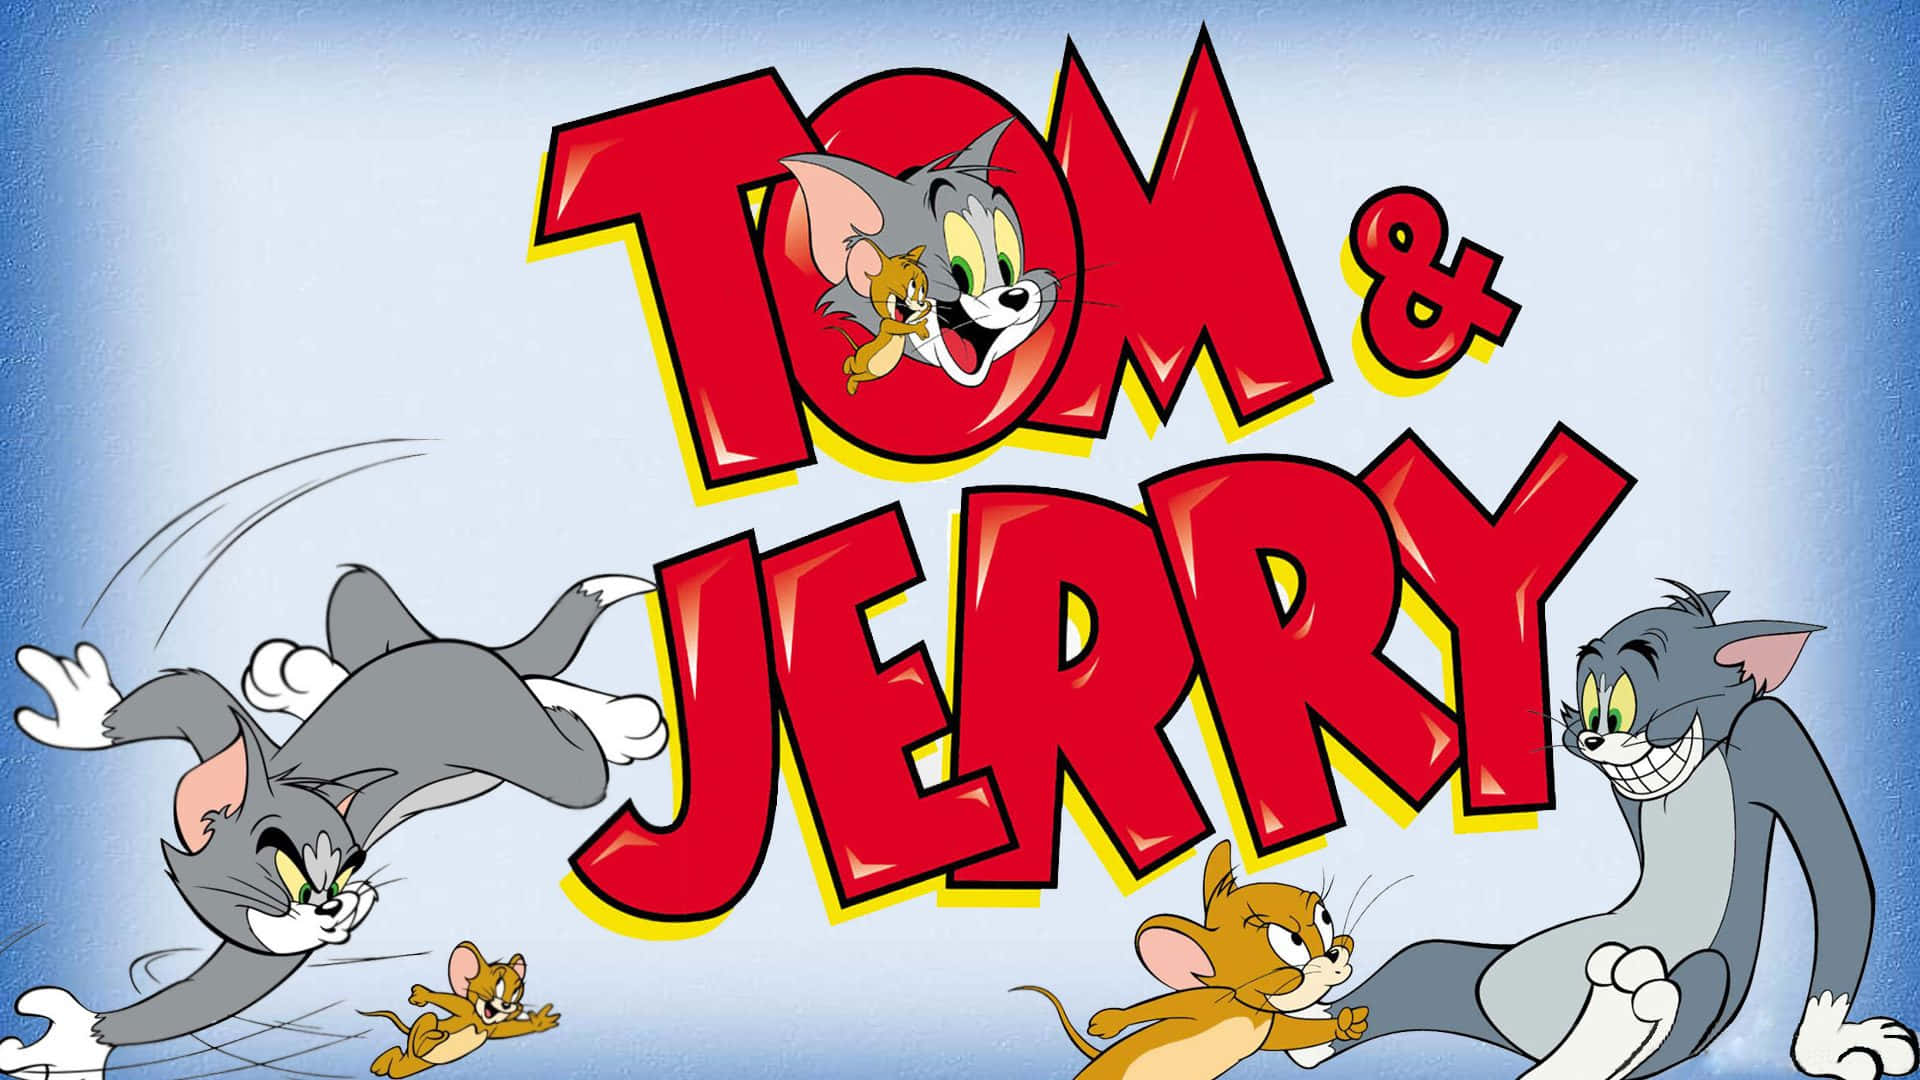 Tom and Jerry, the age-old rivals.